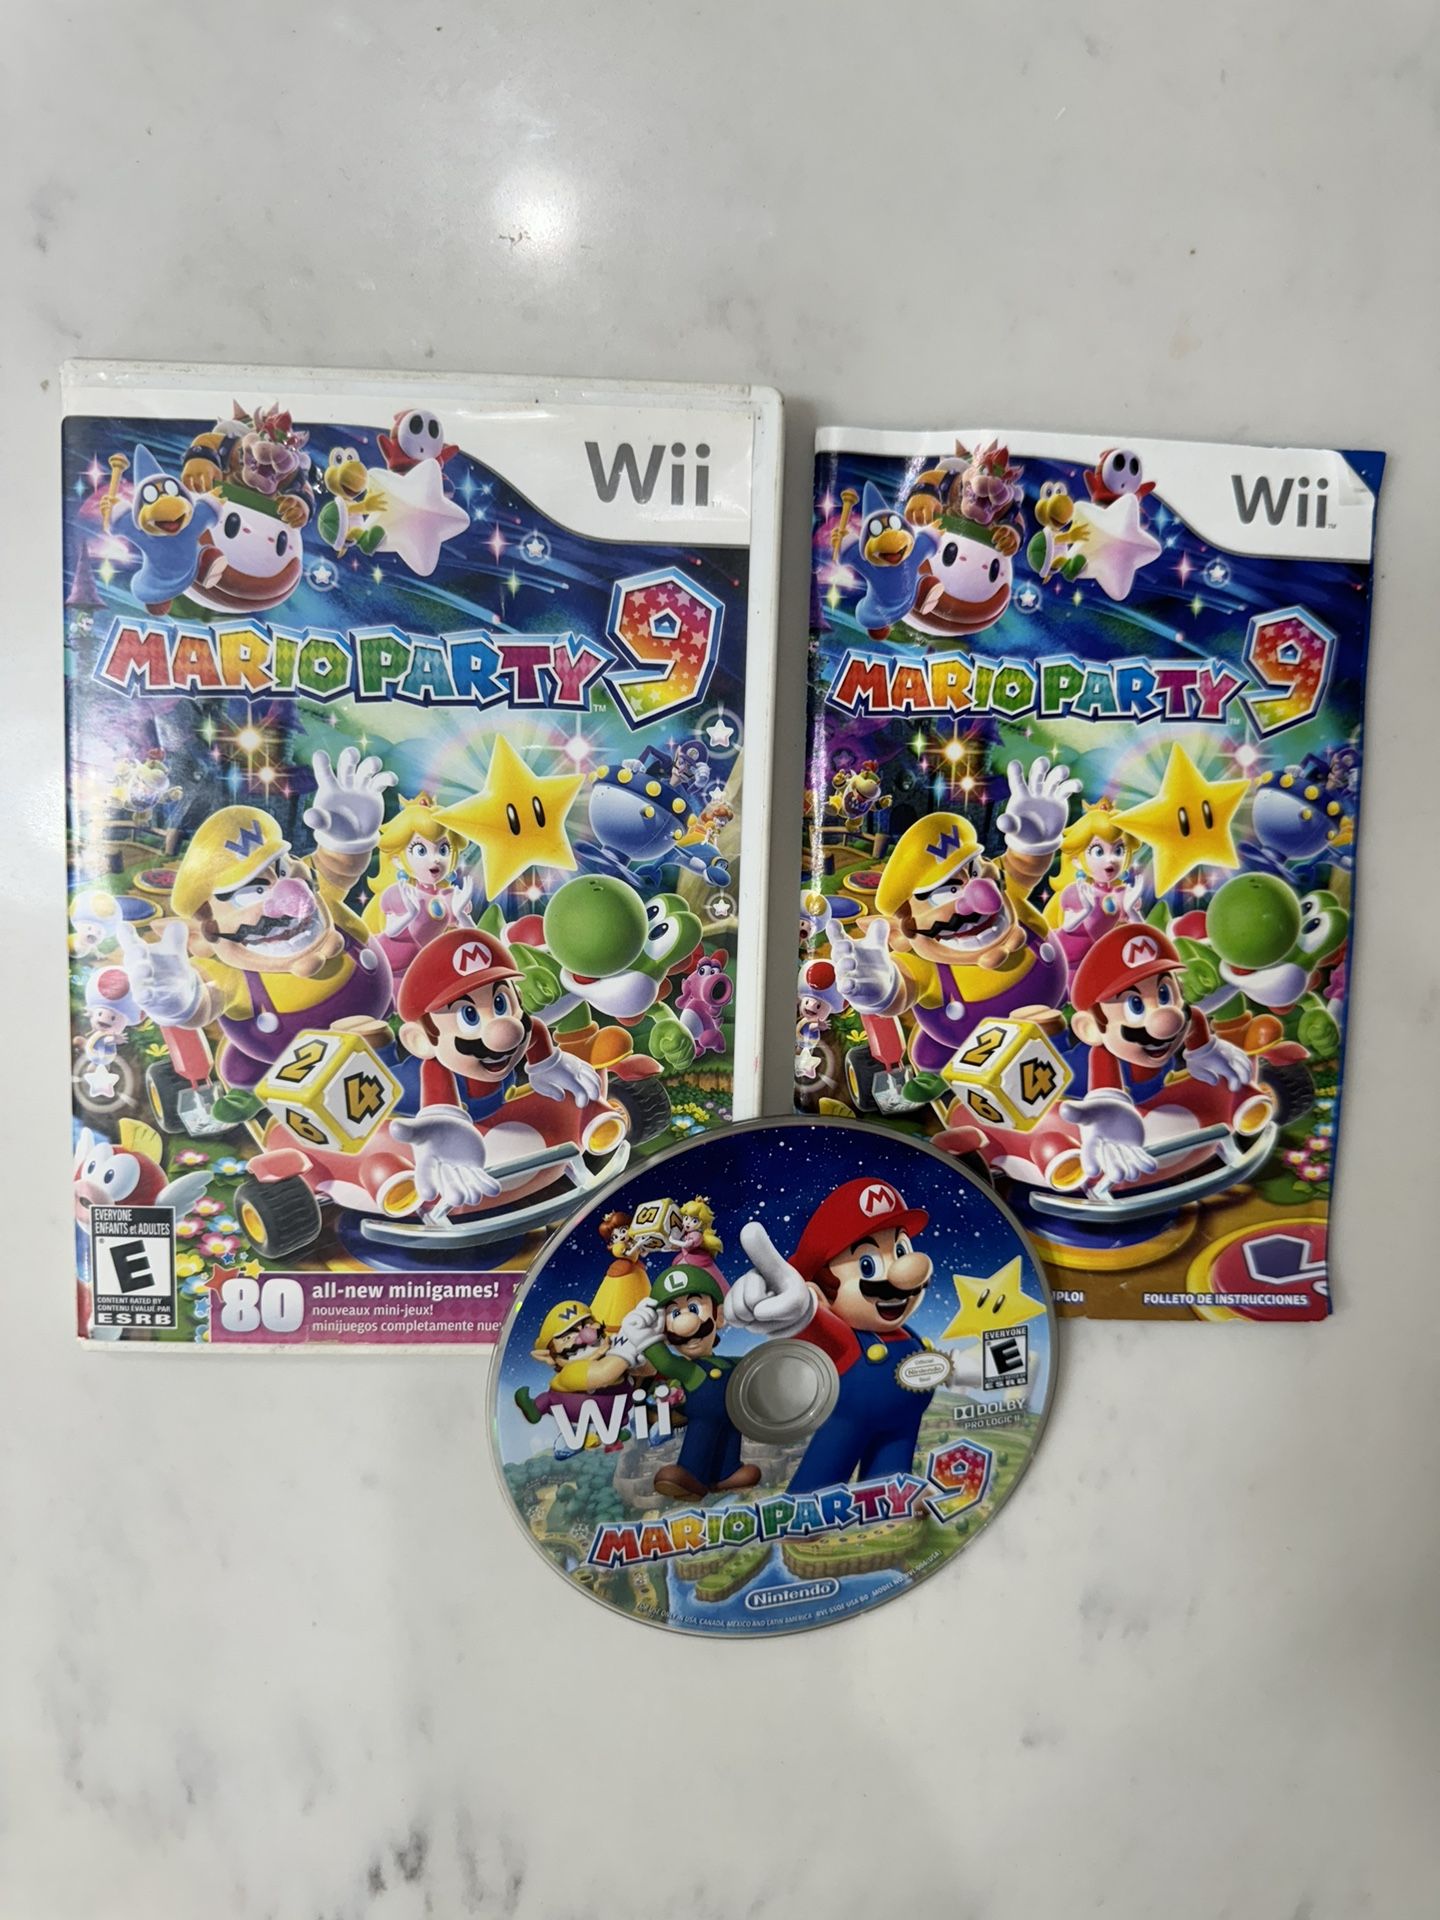 Mario Party 9 Mint Conditions Disc for Nintendo Wii